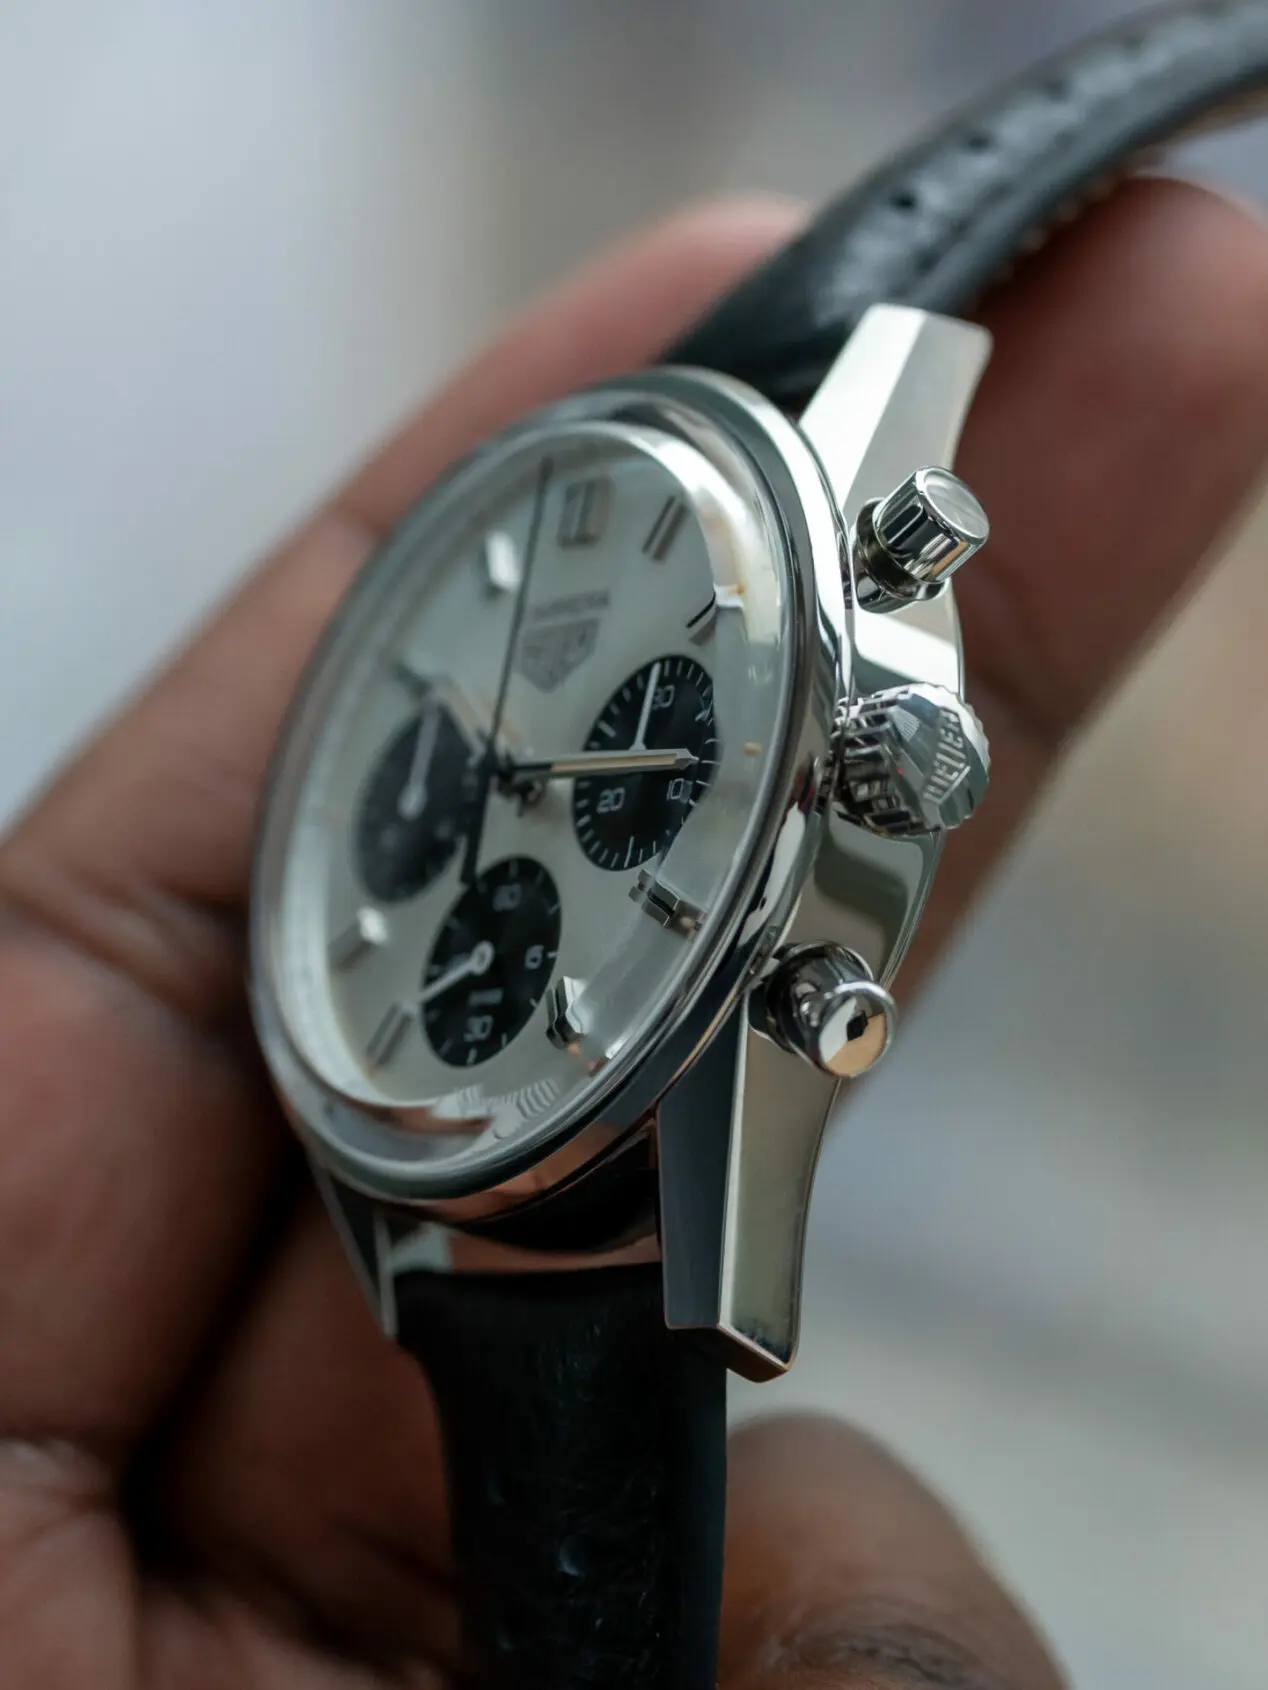 60 years of history and tradition meet with the Carrera Chronograph